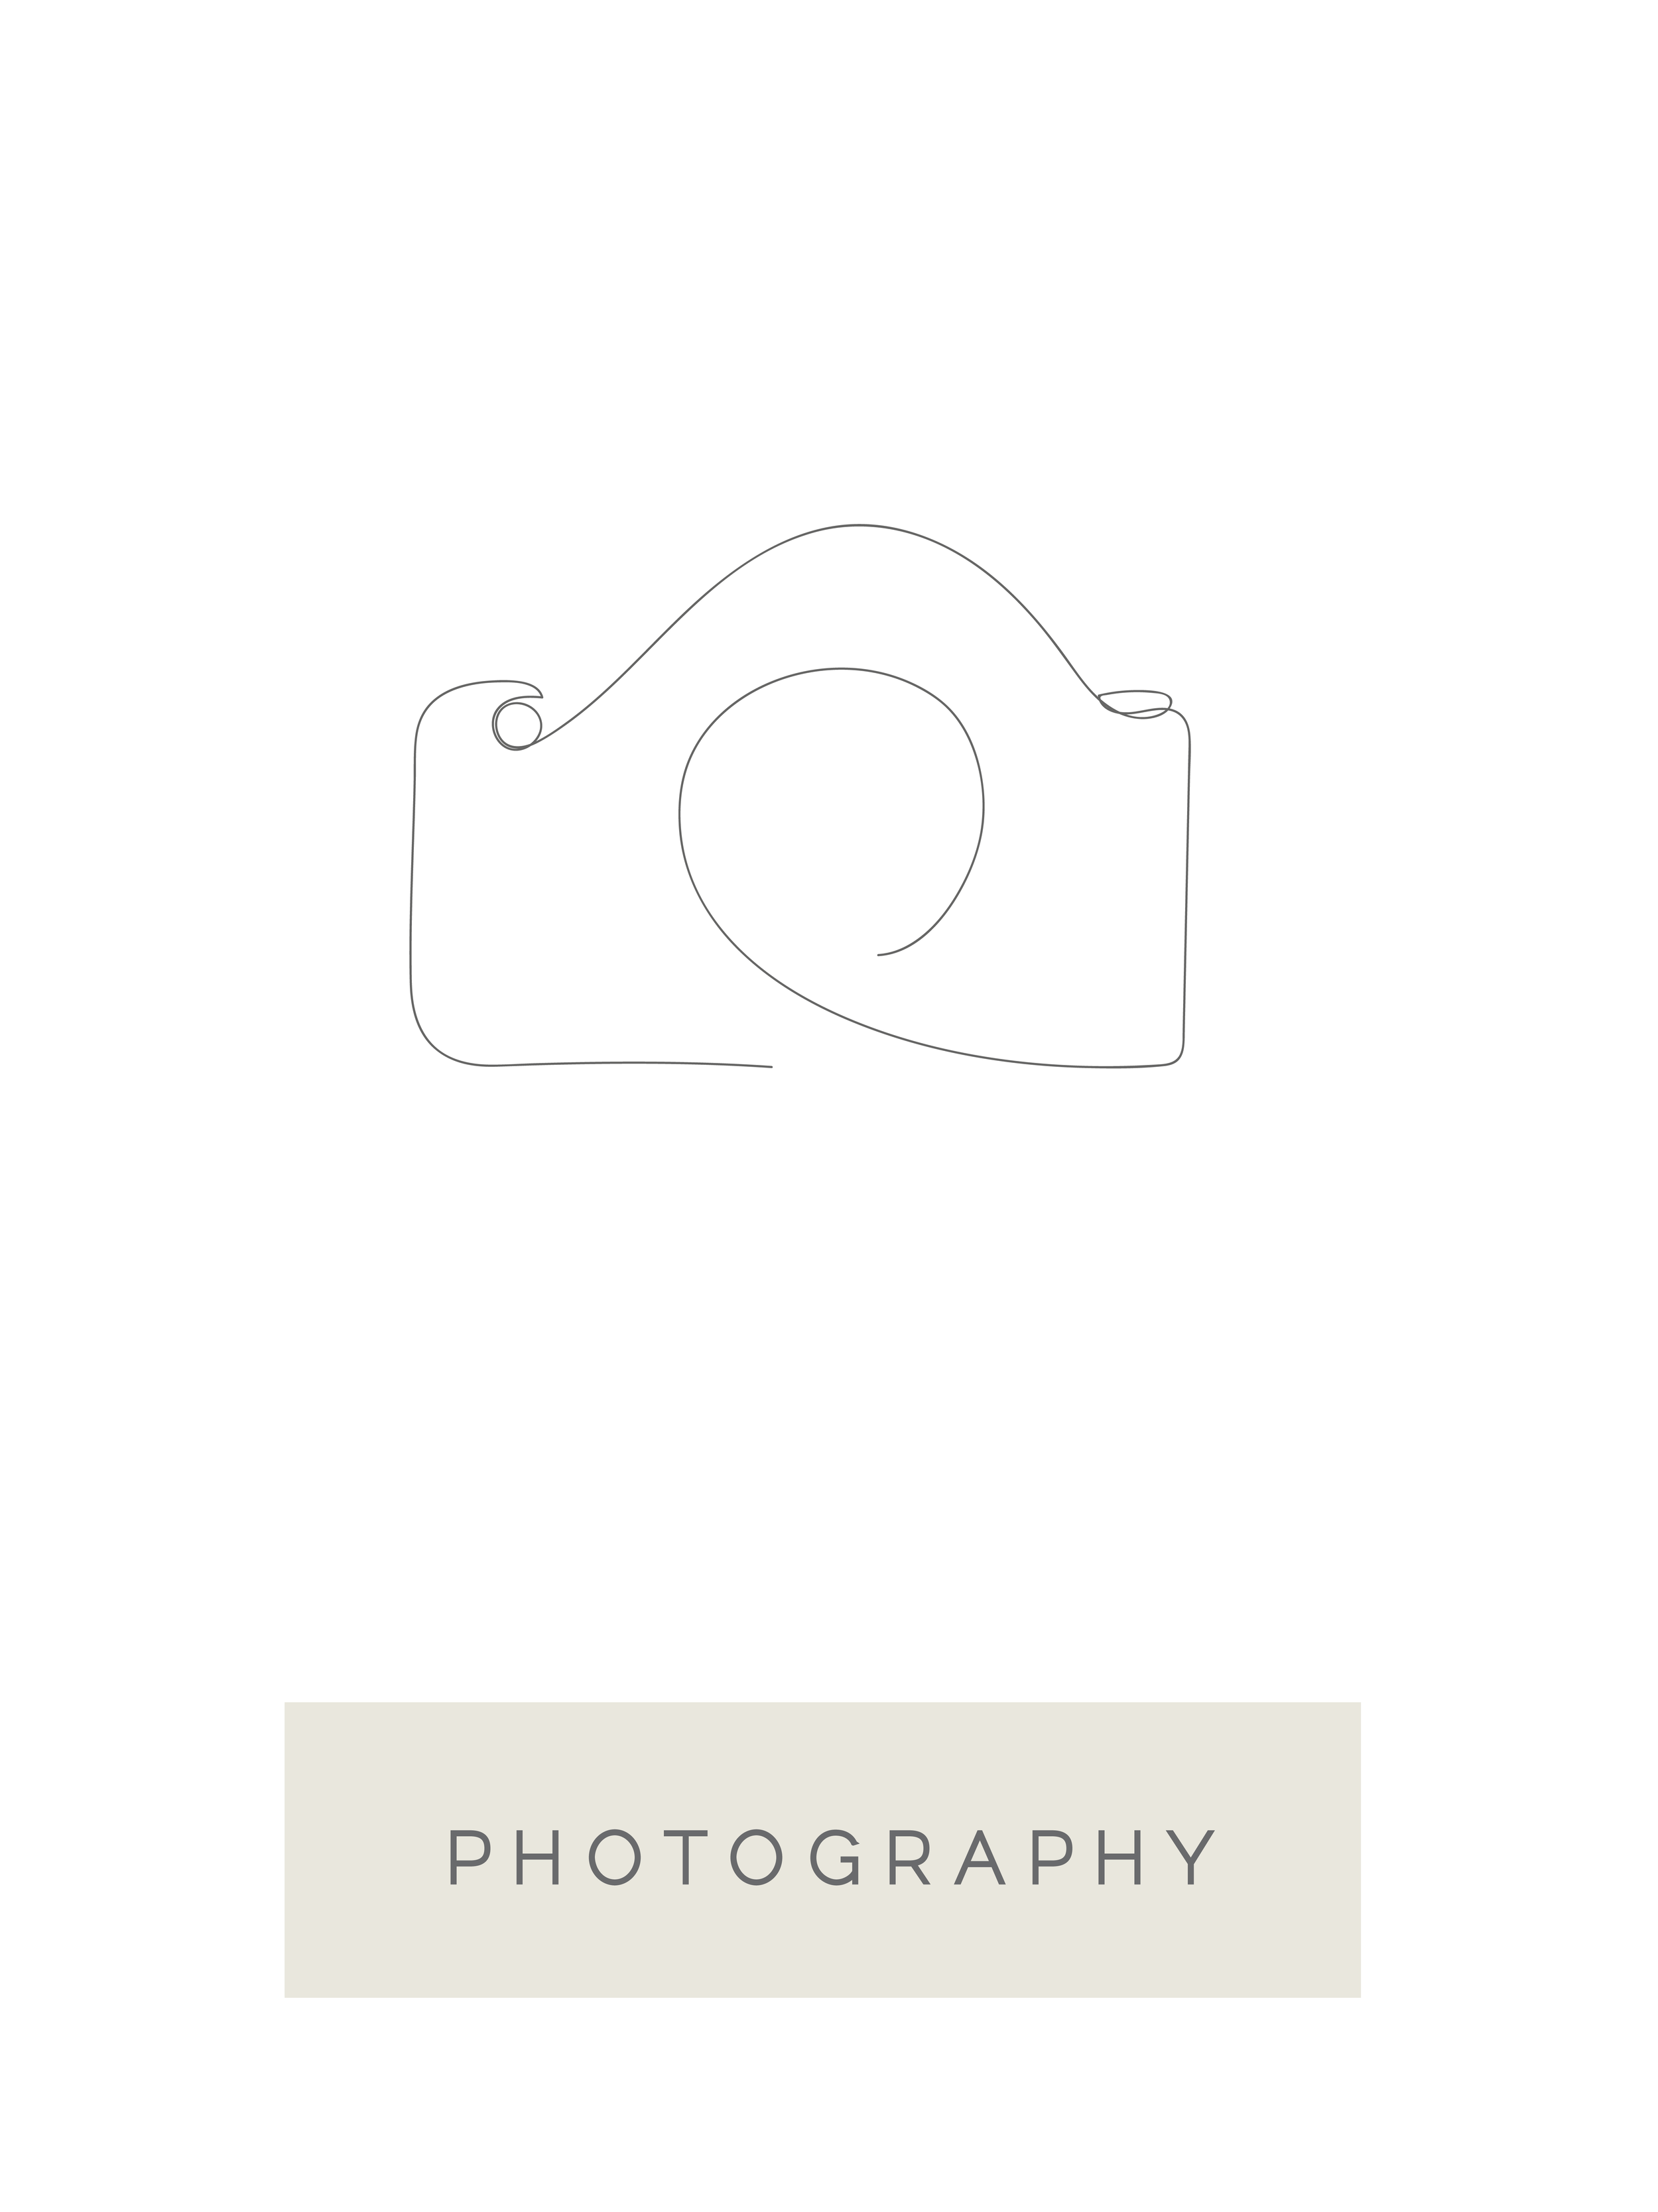 camera_icons_nobkgnd-01.png